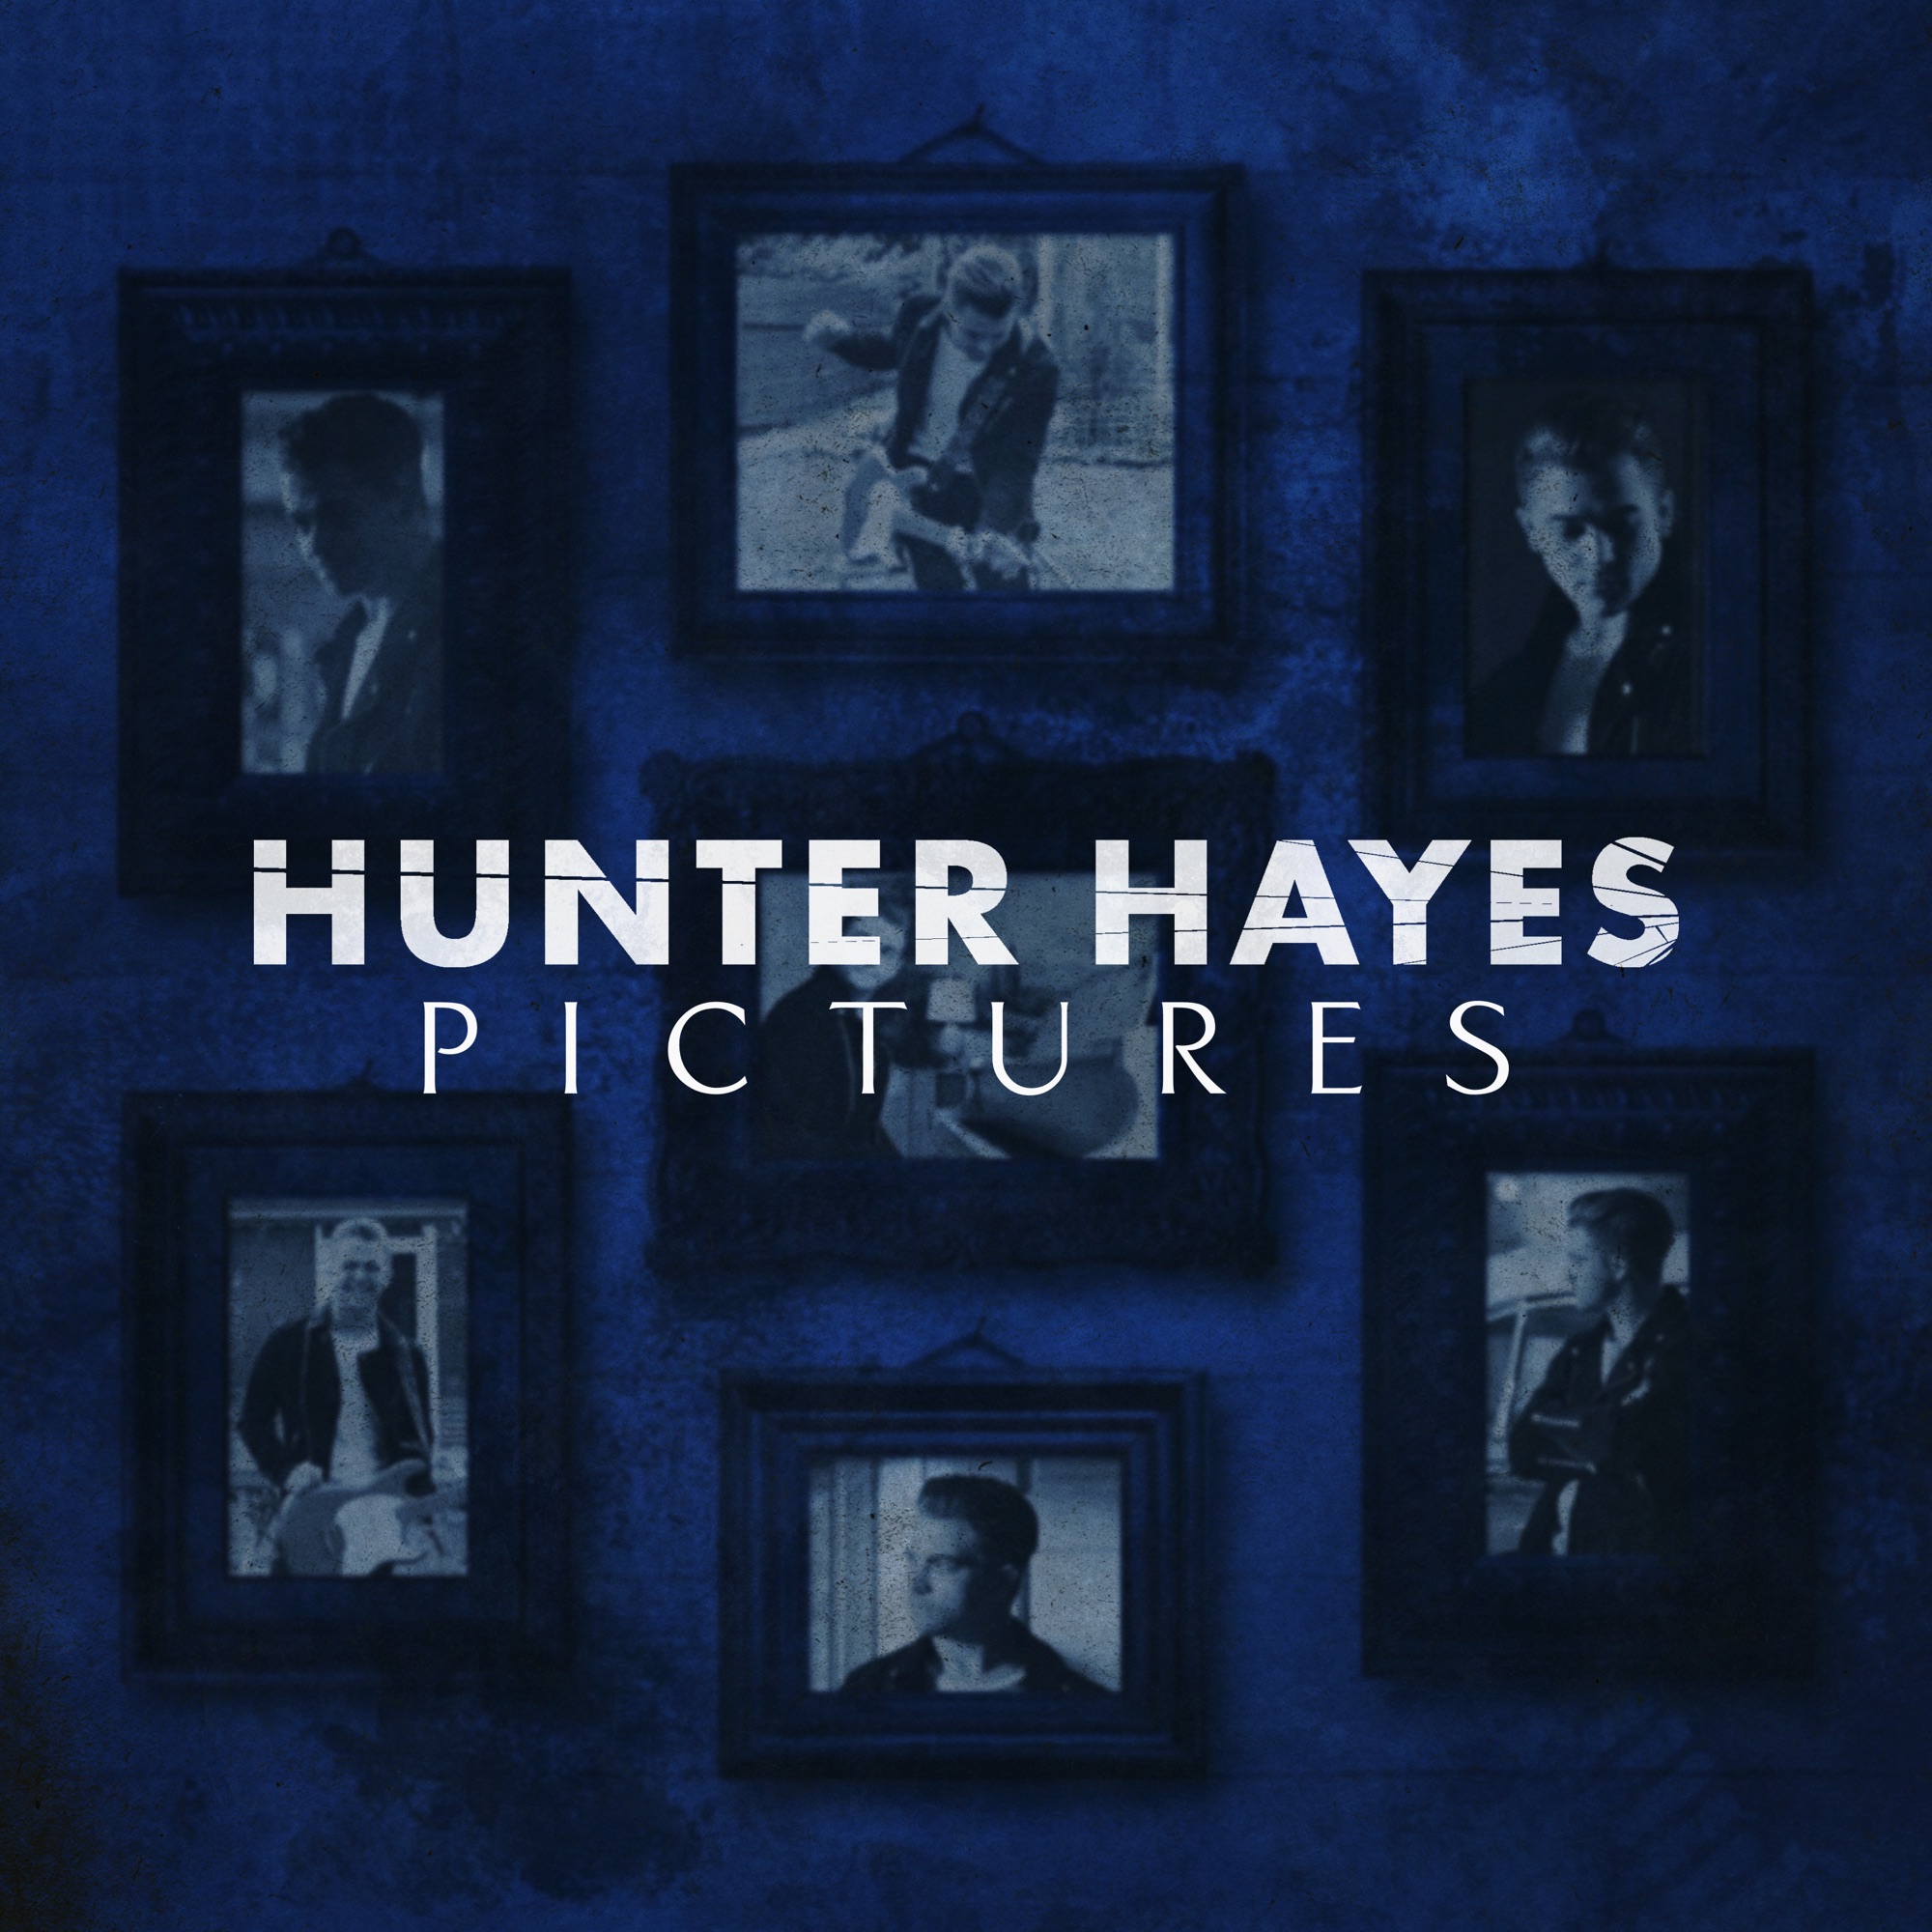 Hunter Hayes Pictures cover artwork